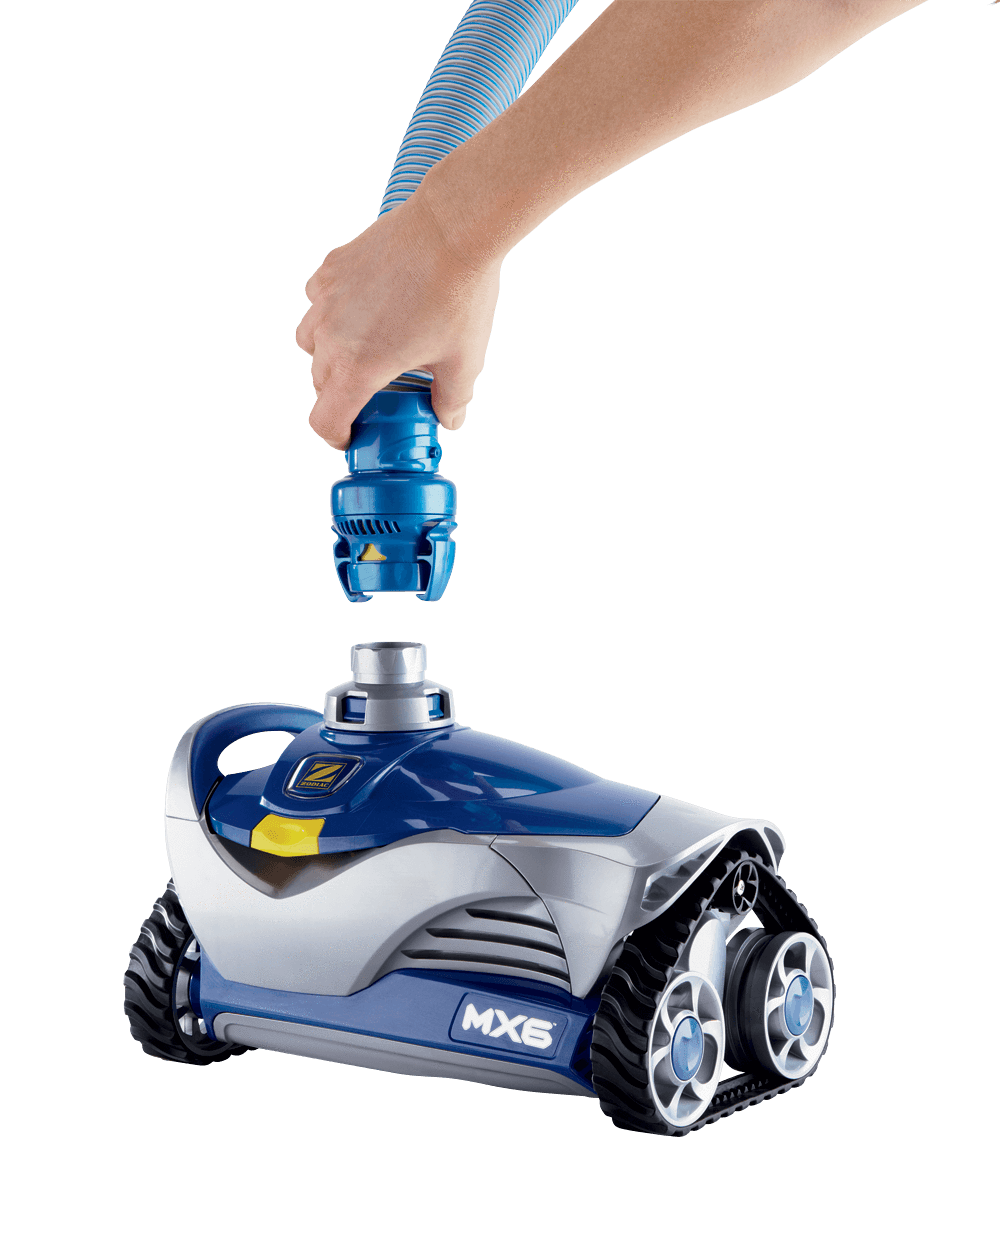 Zodiac MX6 automatic pool vacuum cleaner with easy grip handle